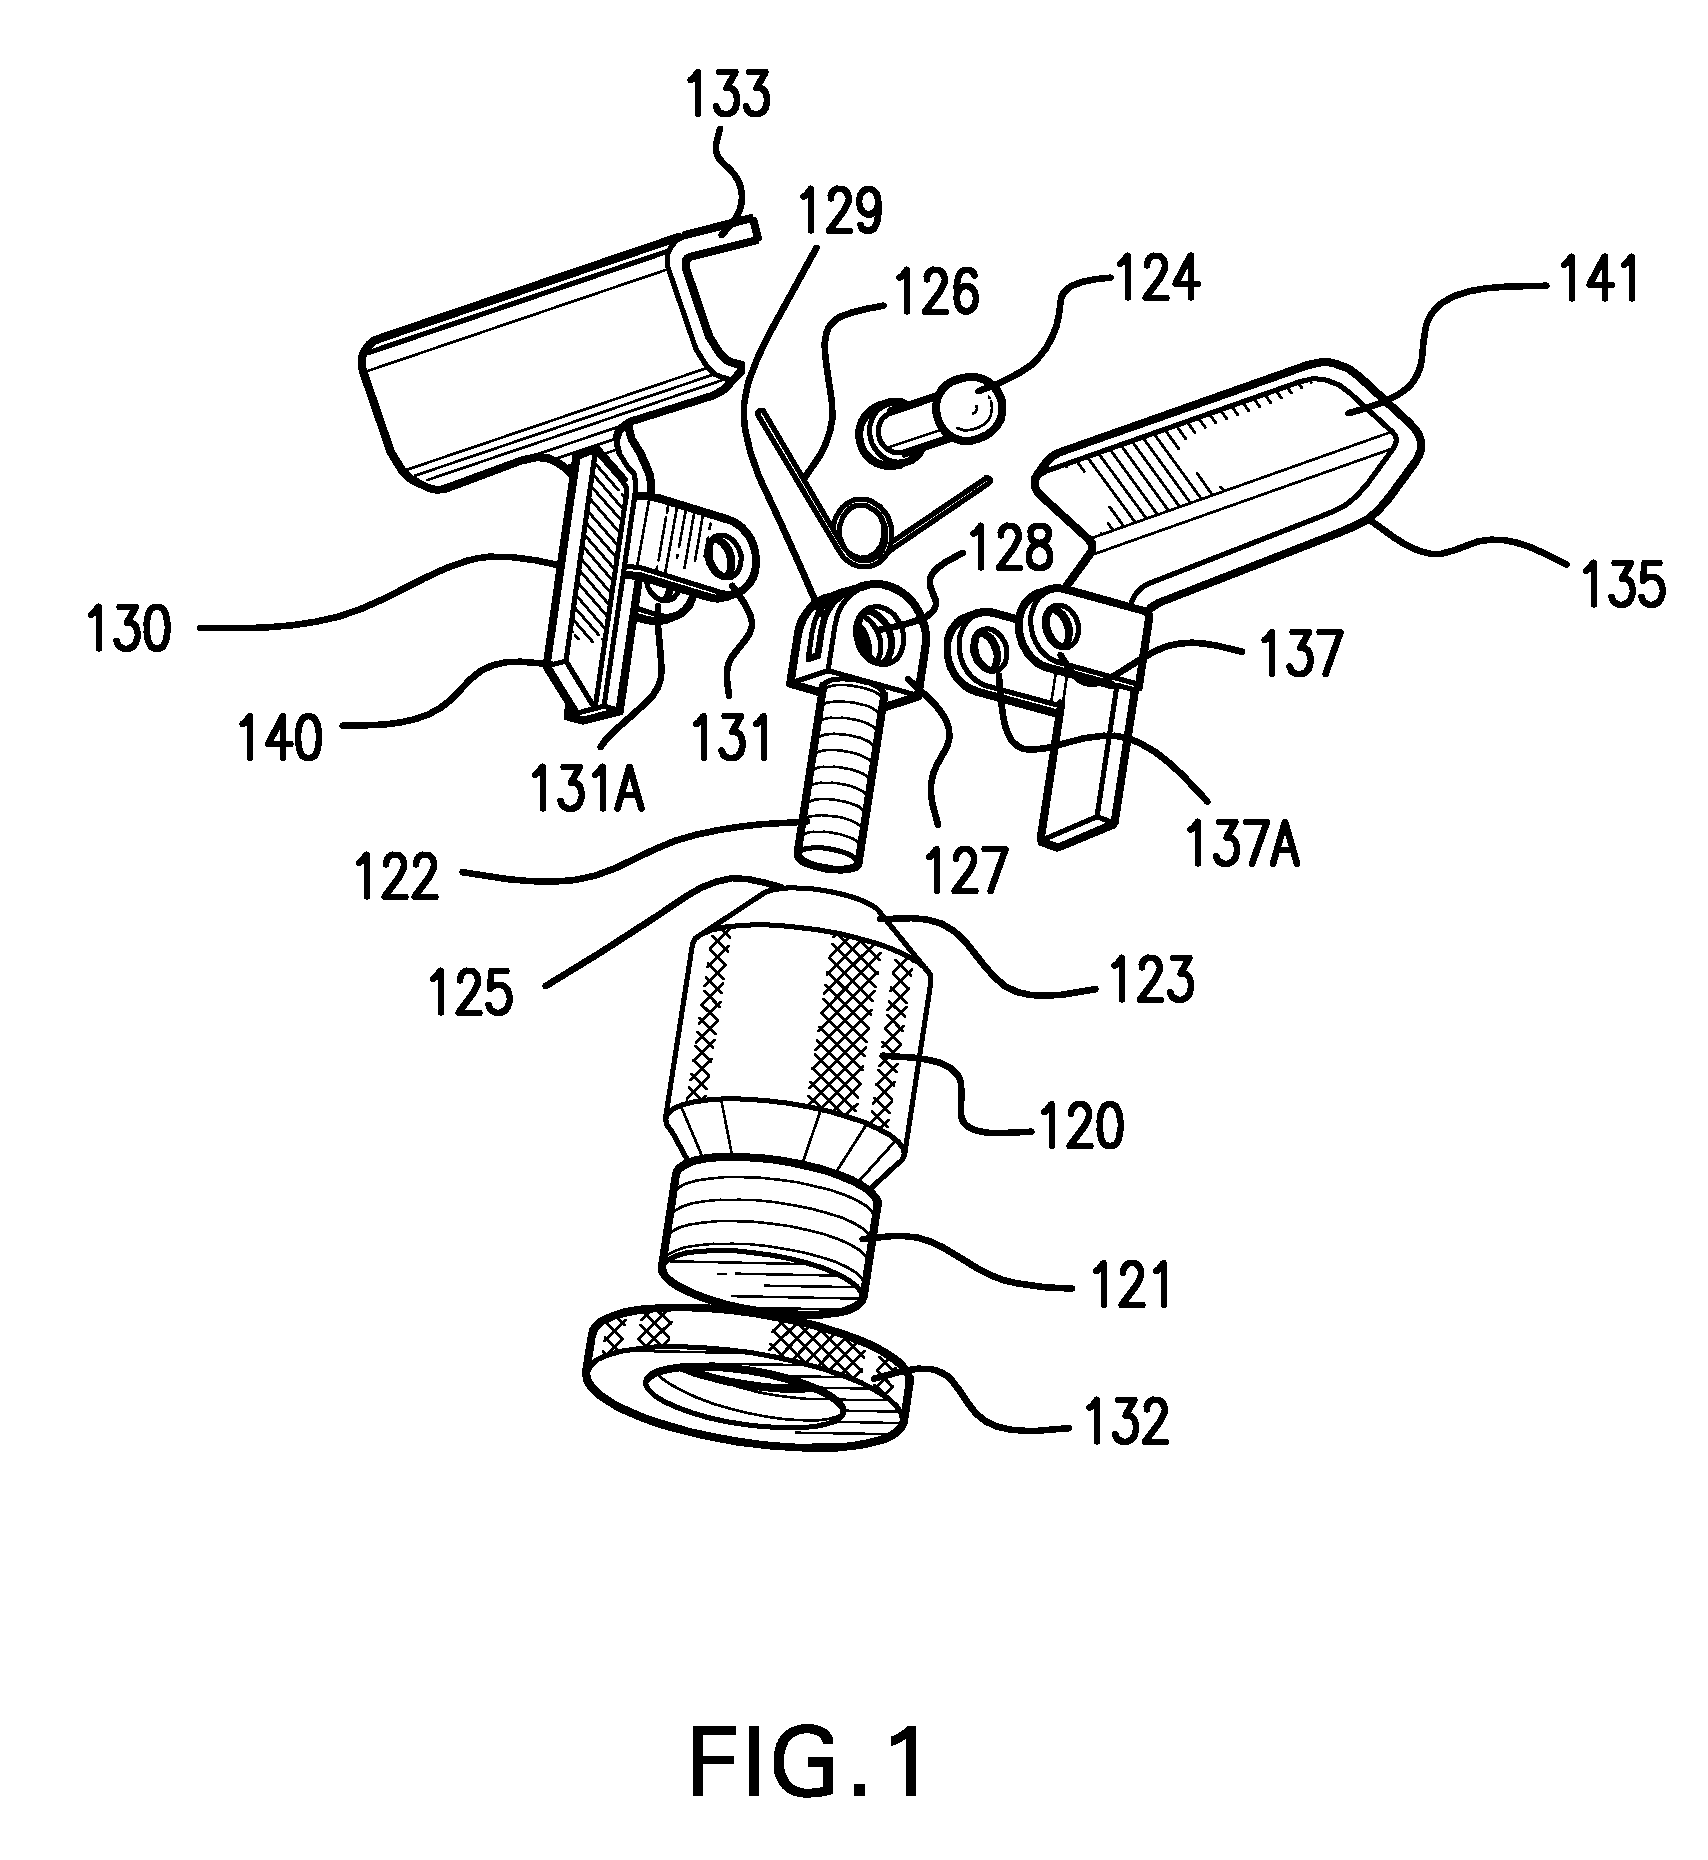 Attachment Apparatus for Studio Equipment and the Like